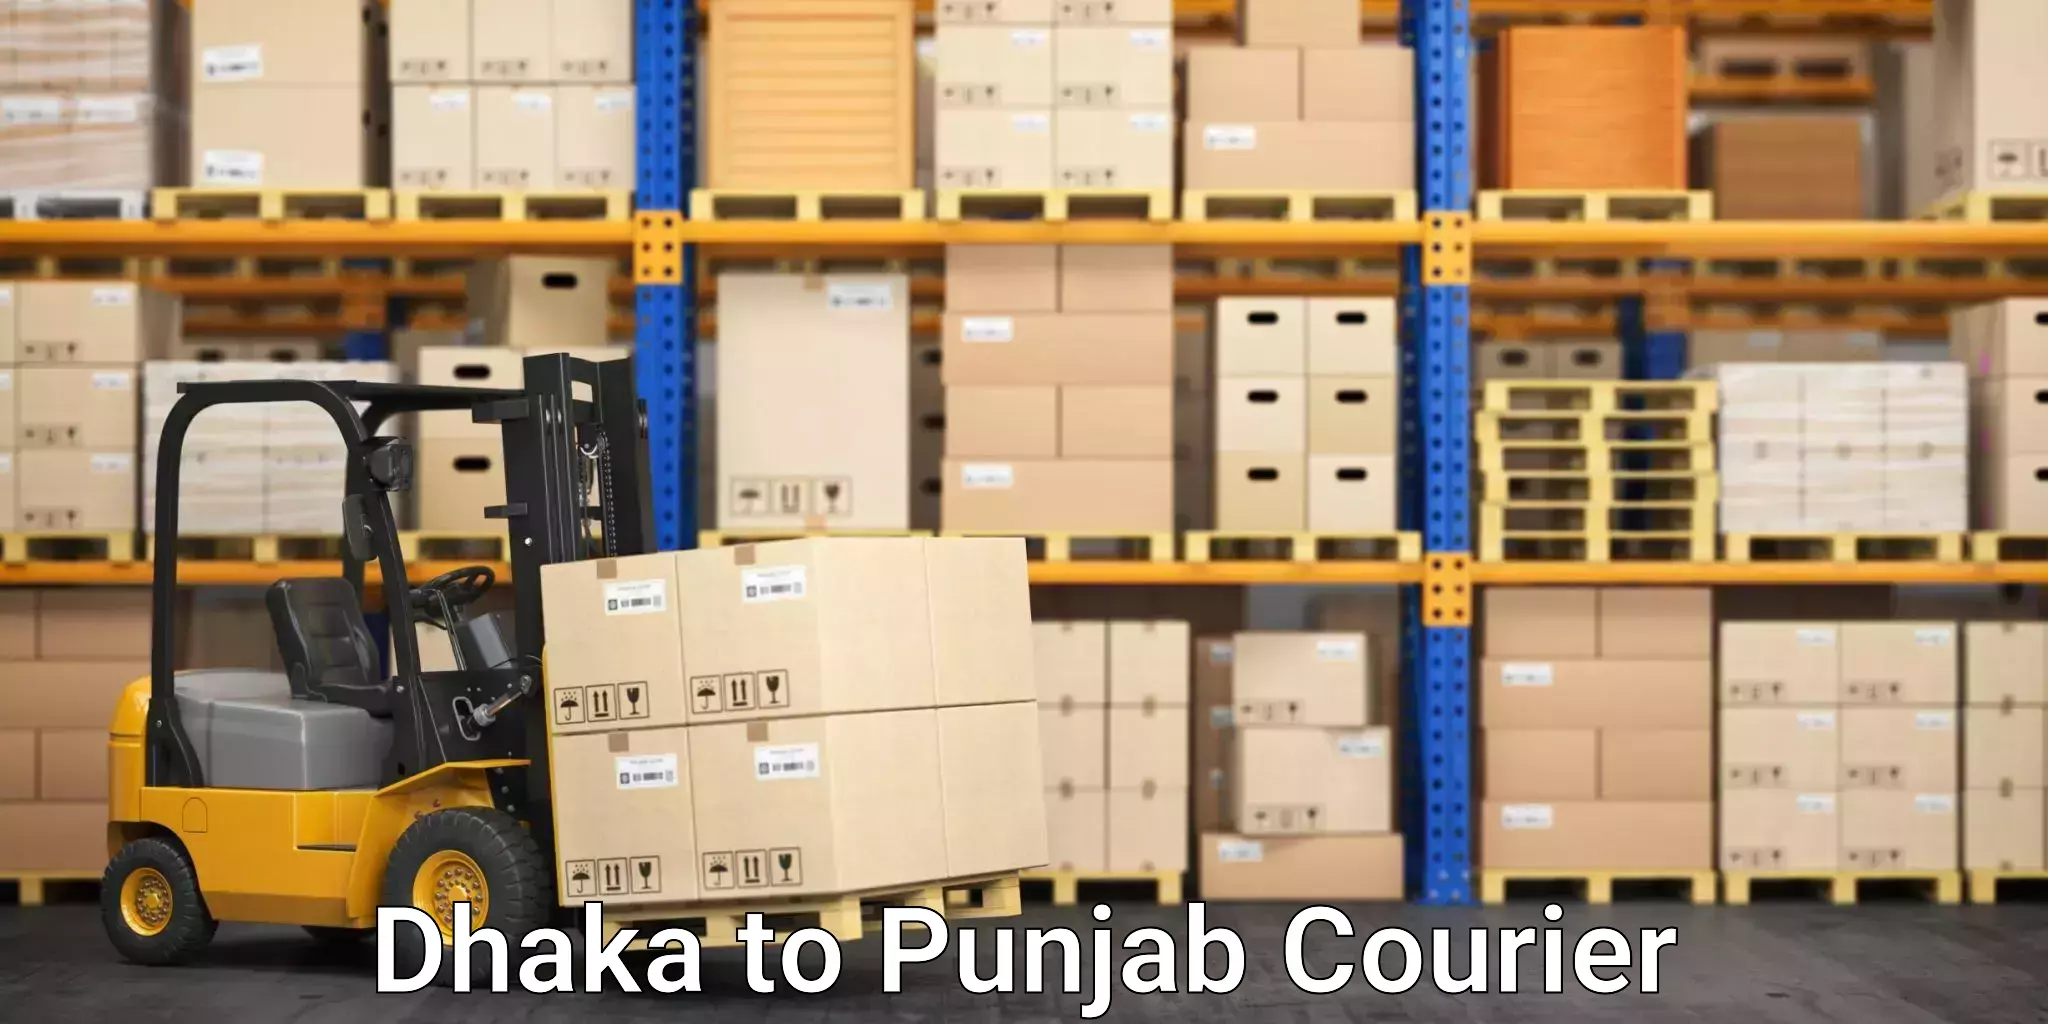 Furniture relocation experts Dhaka to Patiala